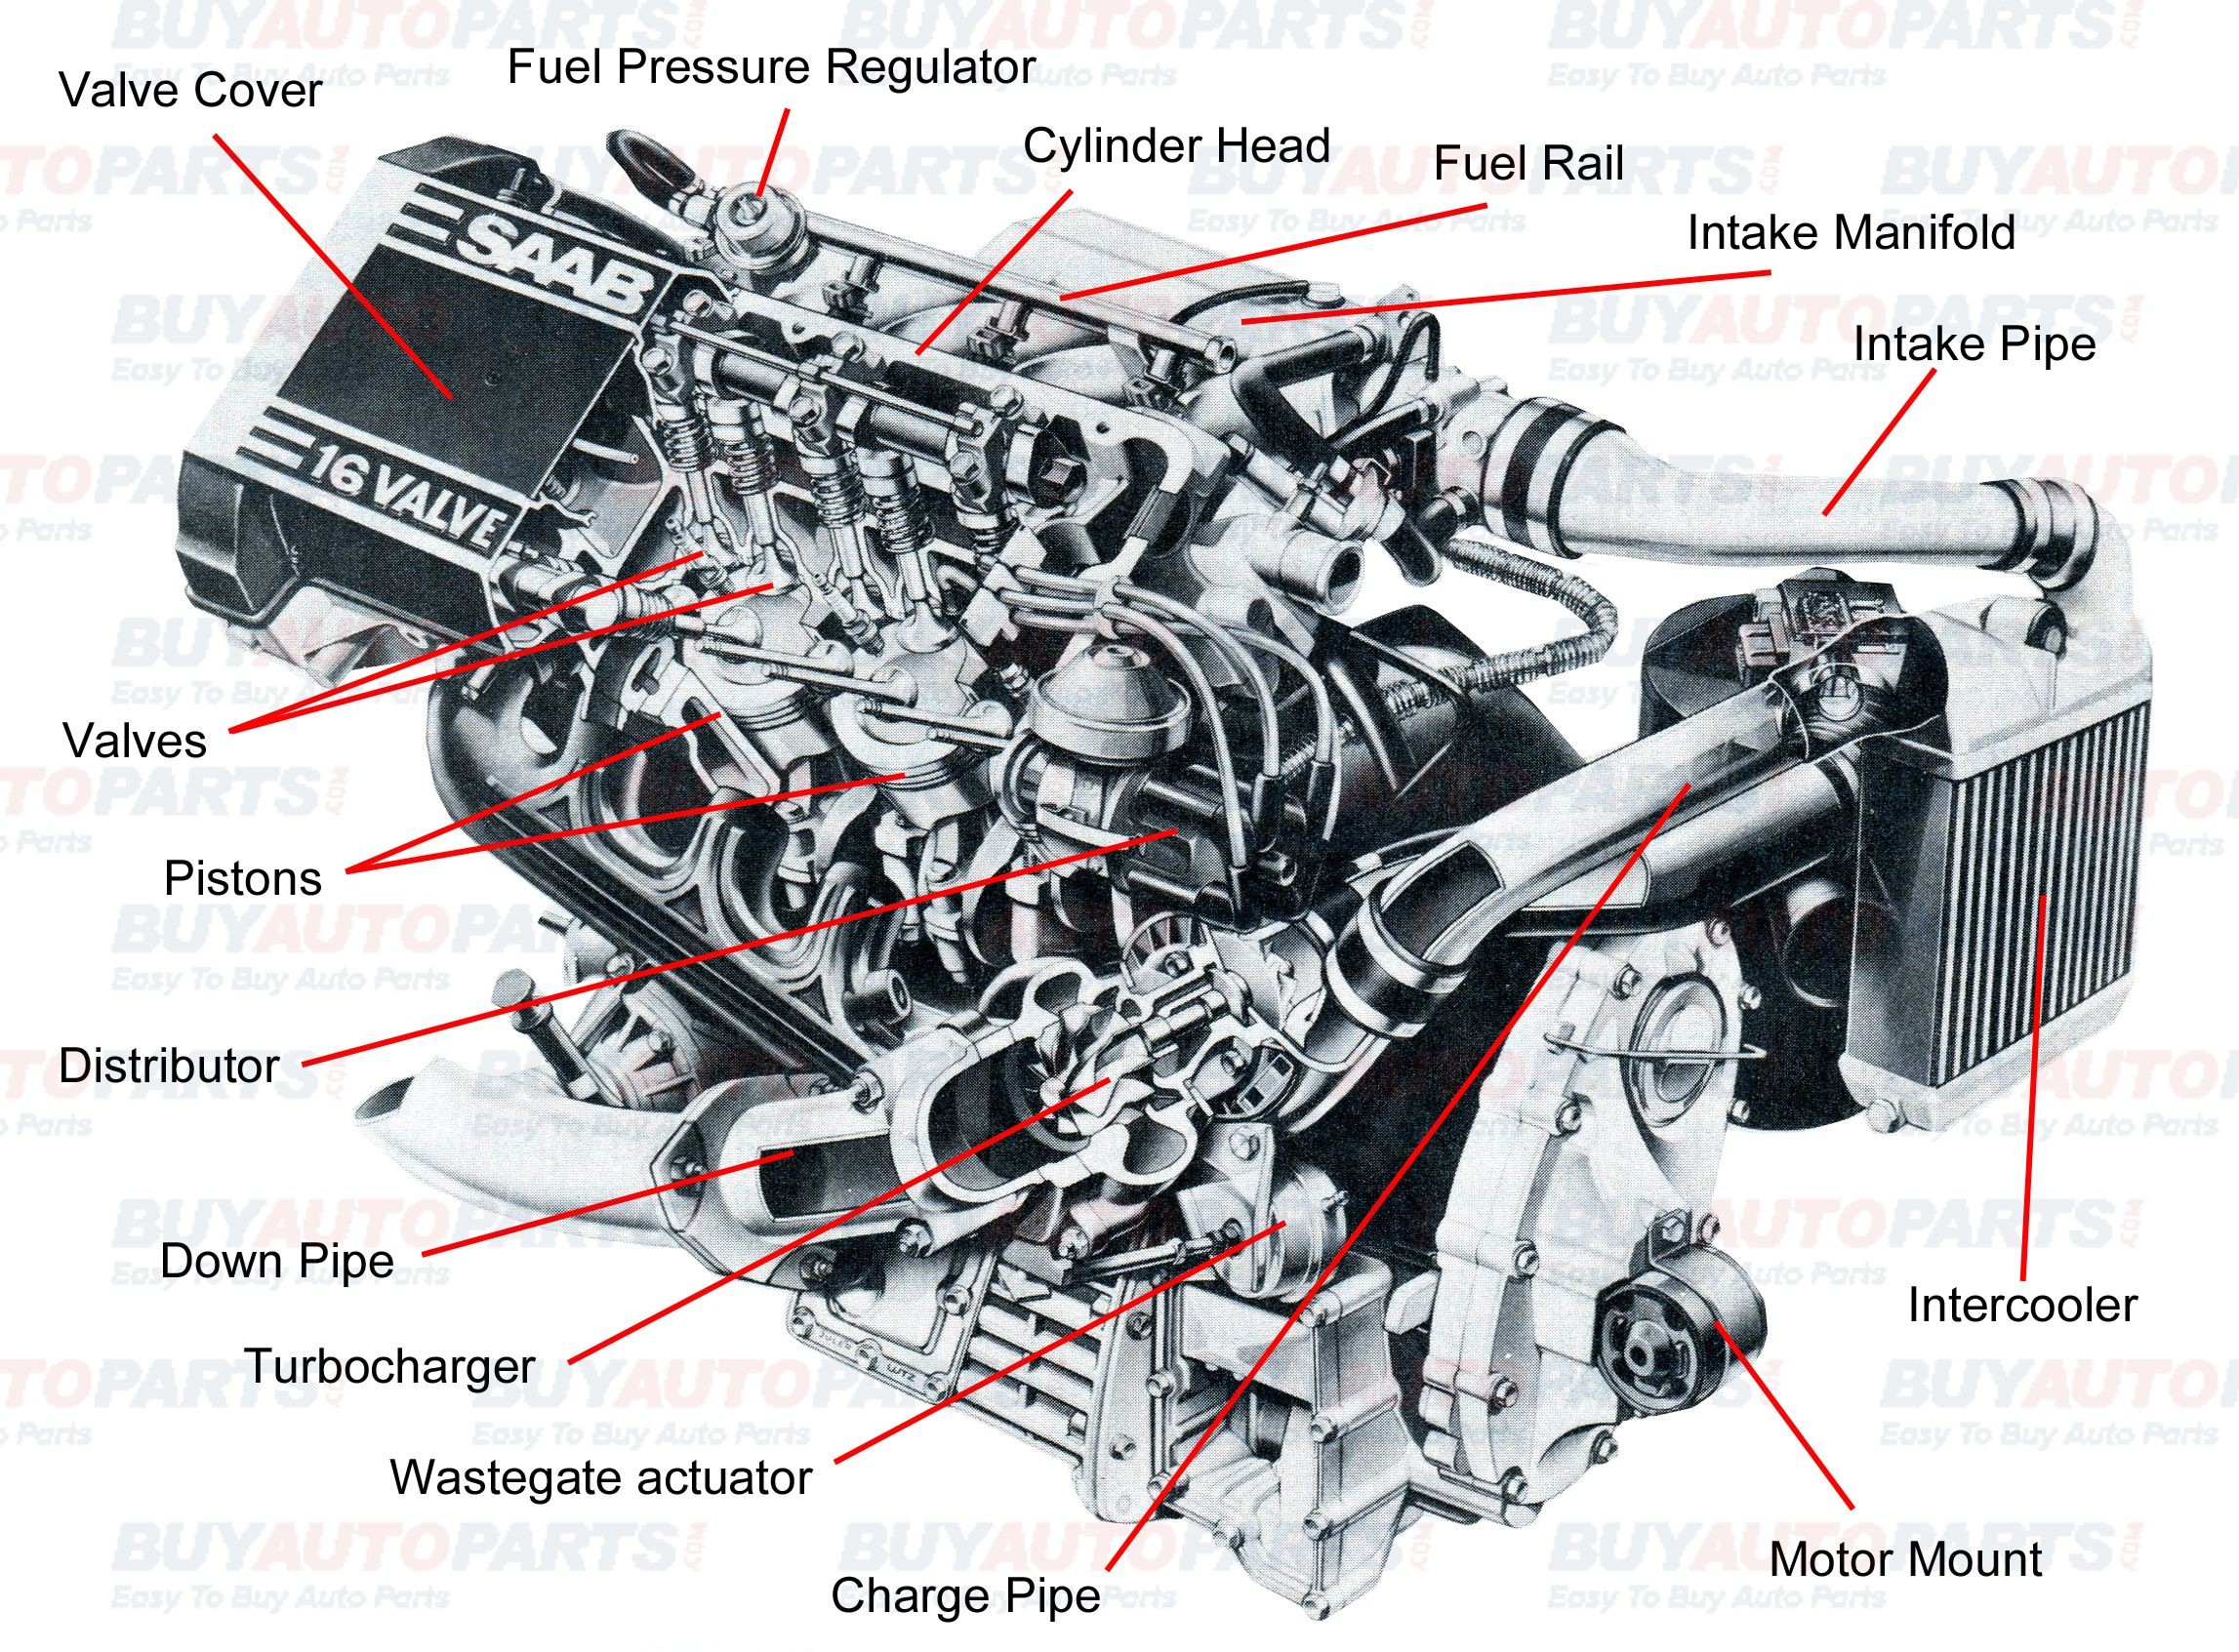 Diagram Of Car Tyre Pin by Jimmiejanet Testellamwfz On What Does An Engine with Turbo Of Diagram Of Car Tyre